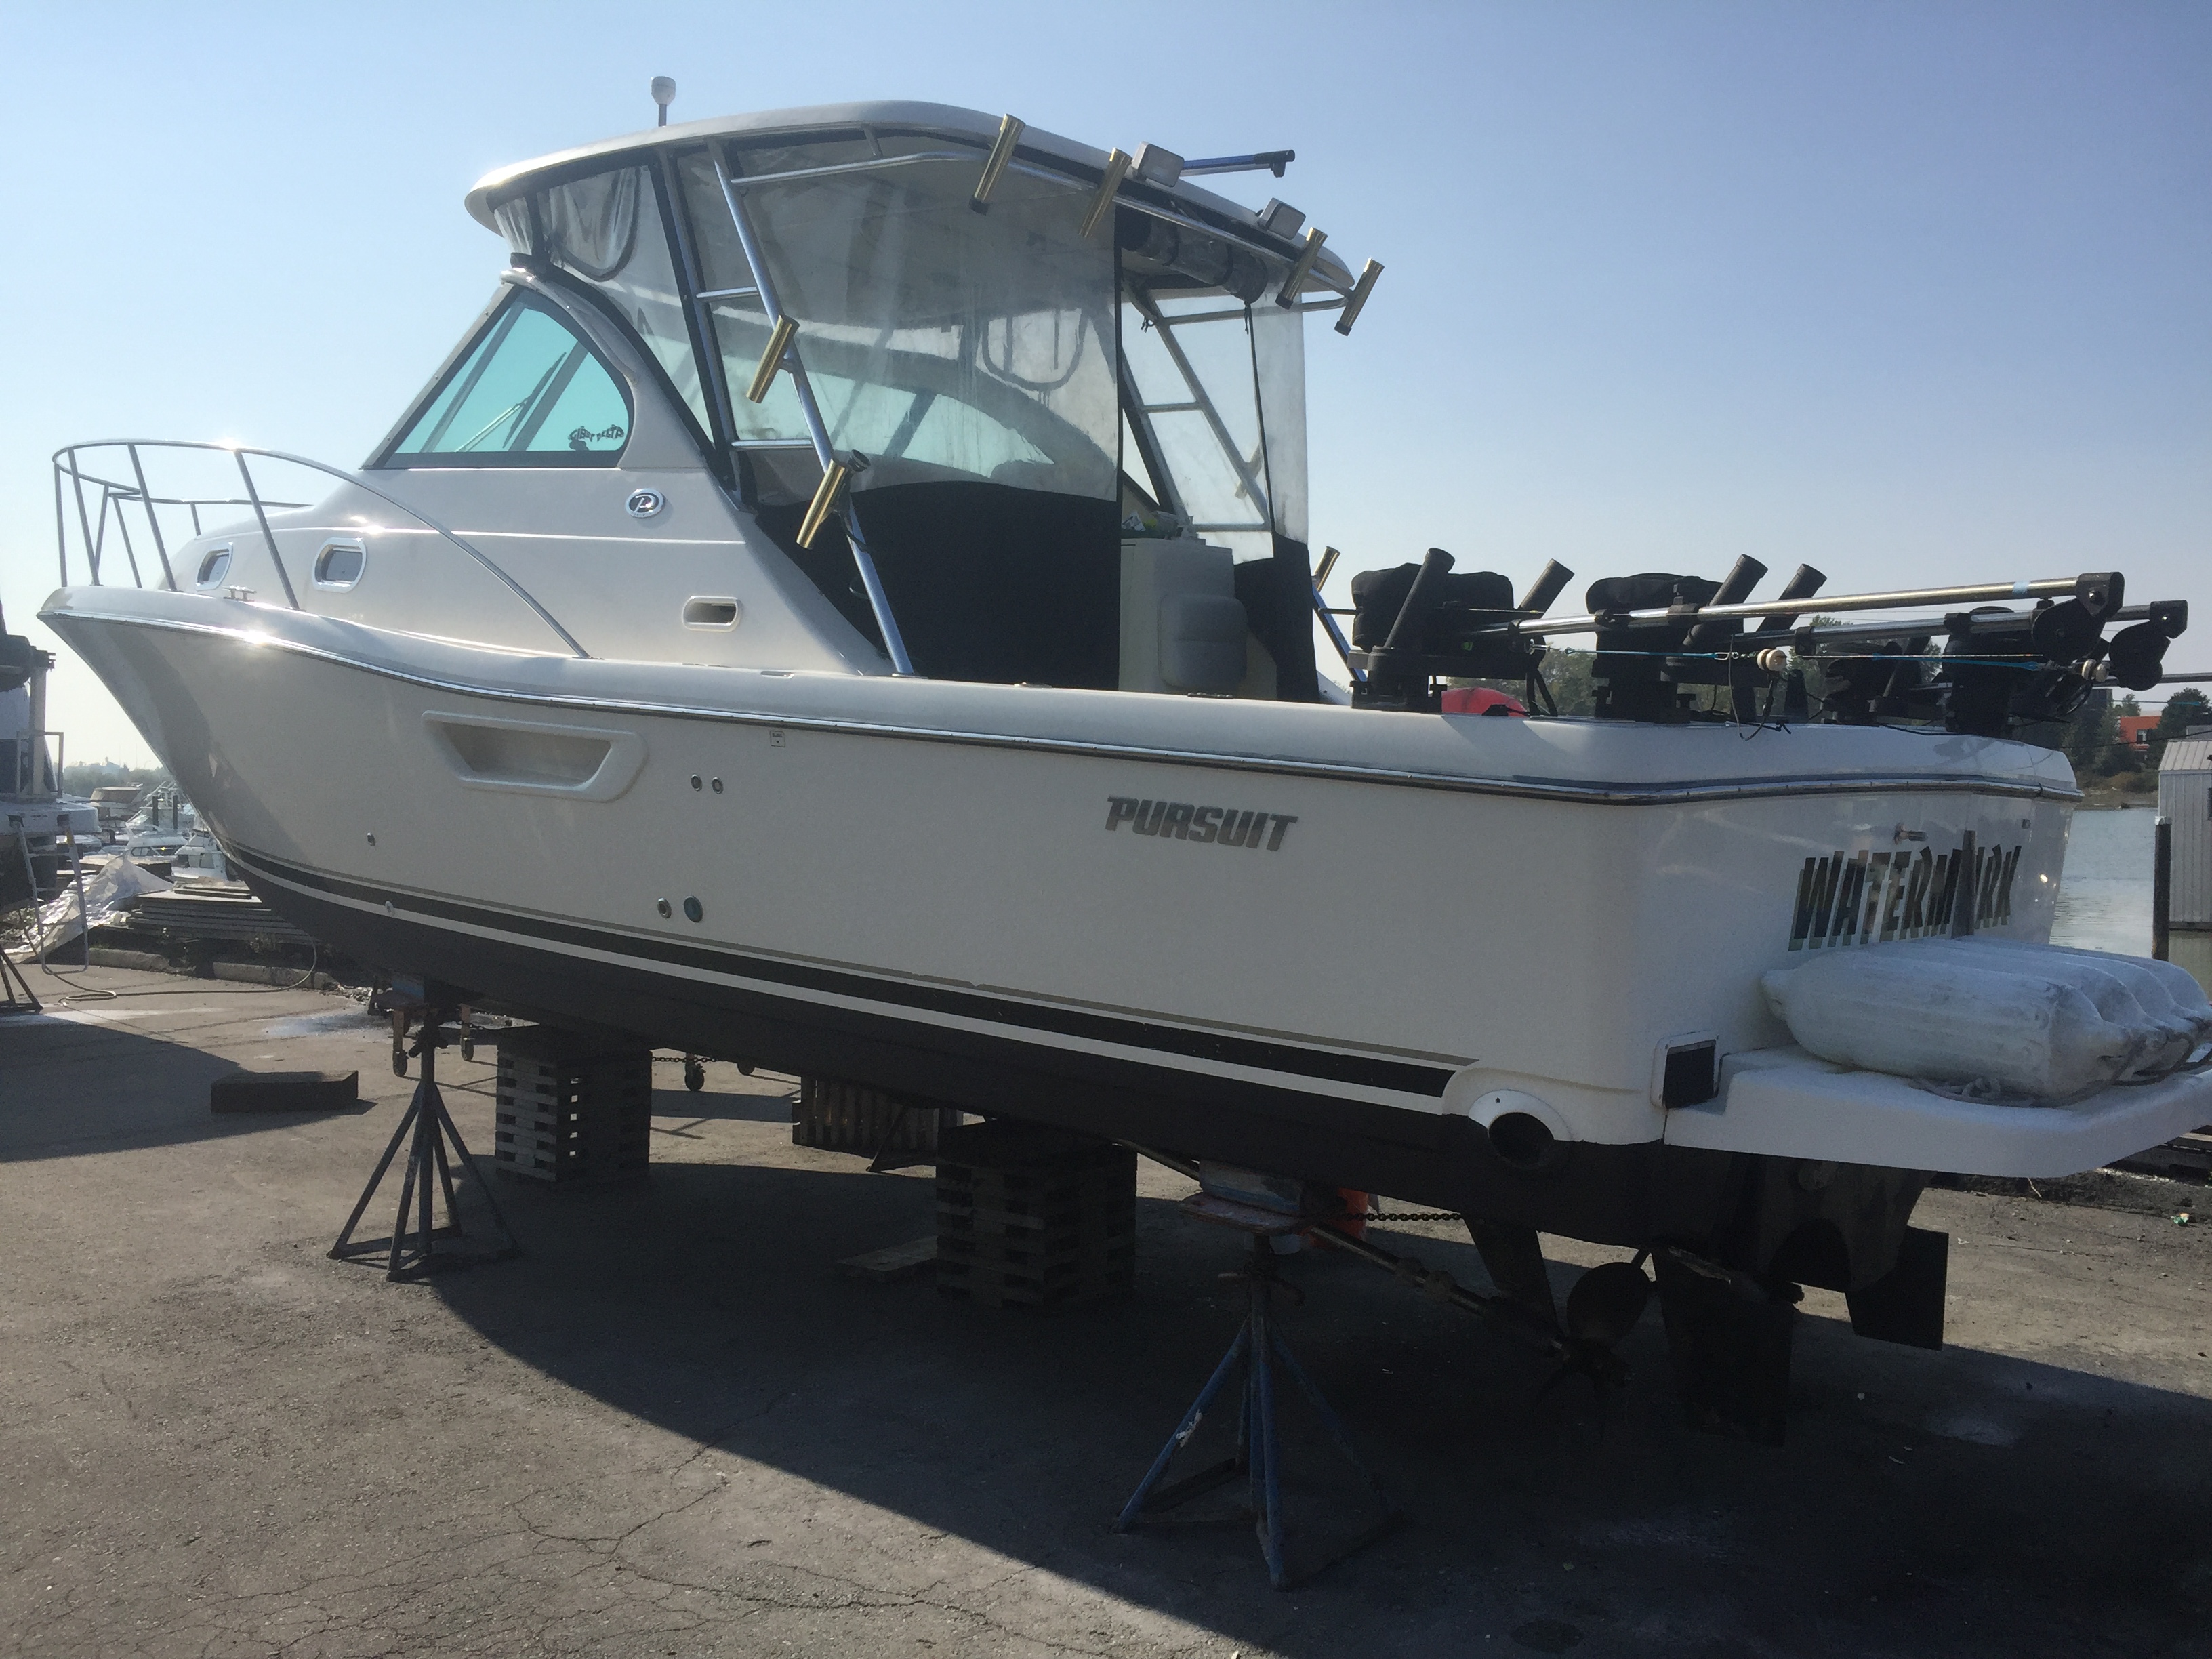 Pursuit sport fish boat with gelcoat repairs, boat detailing and maintenance service at Skyline Marina in Richmond BC from MRV Marine Services.